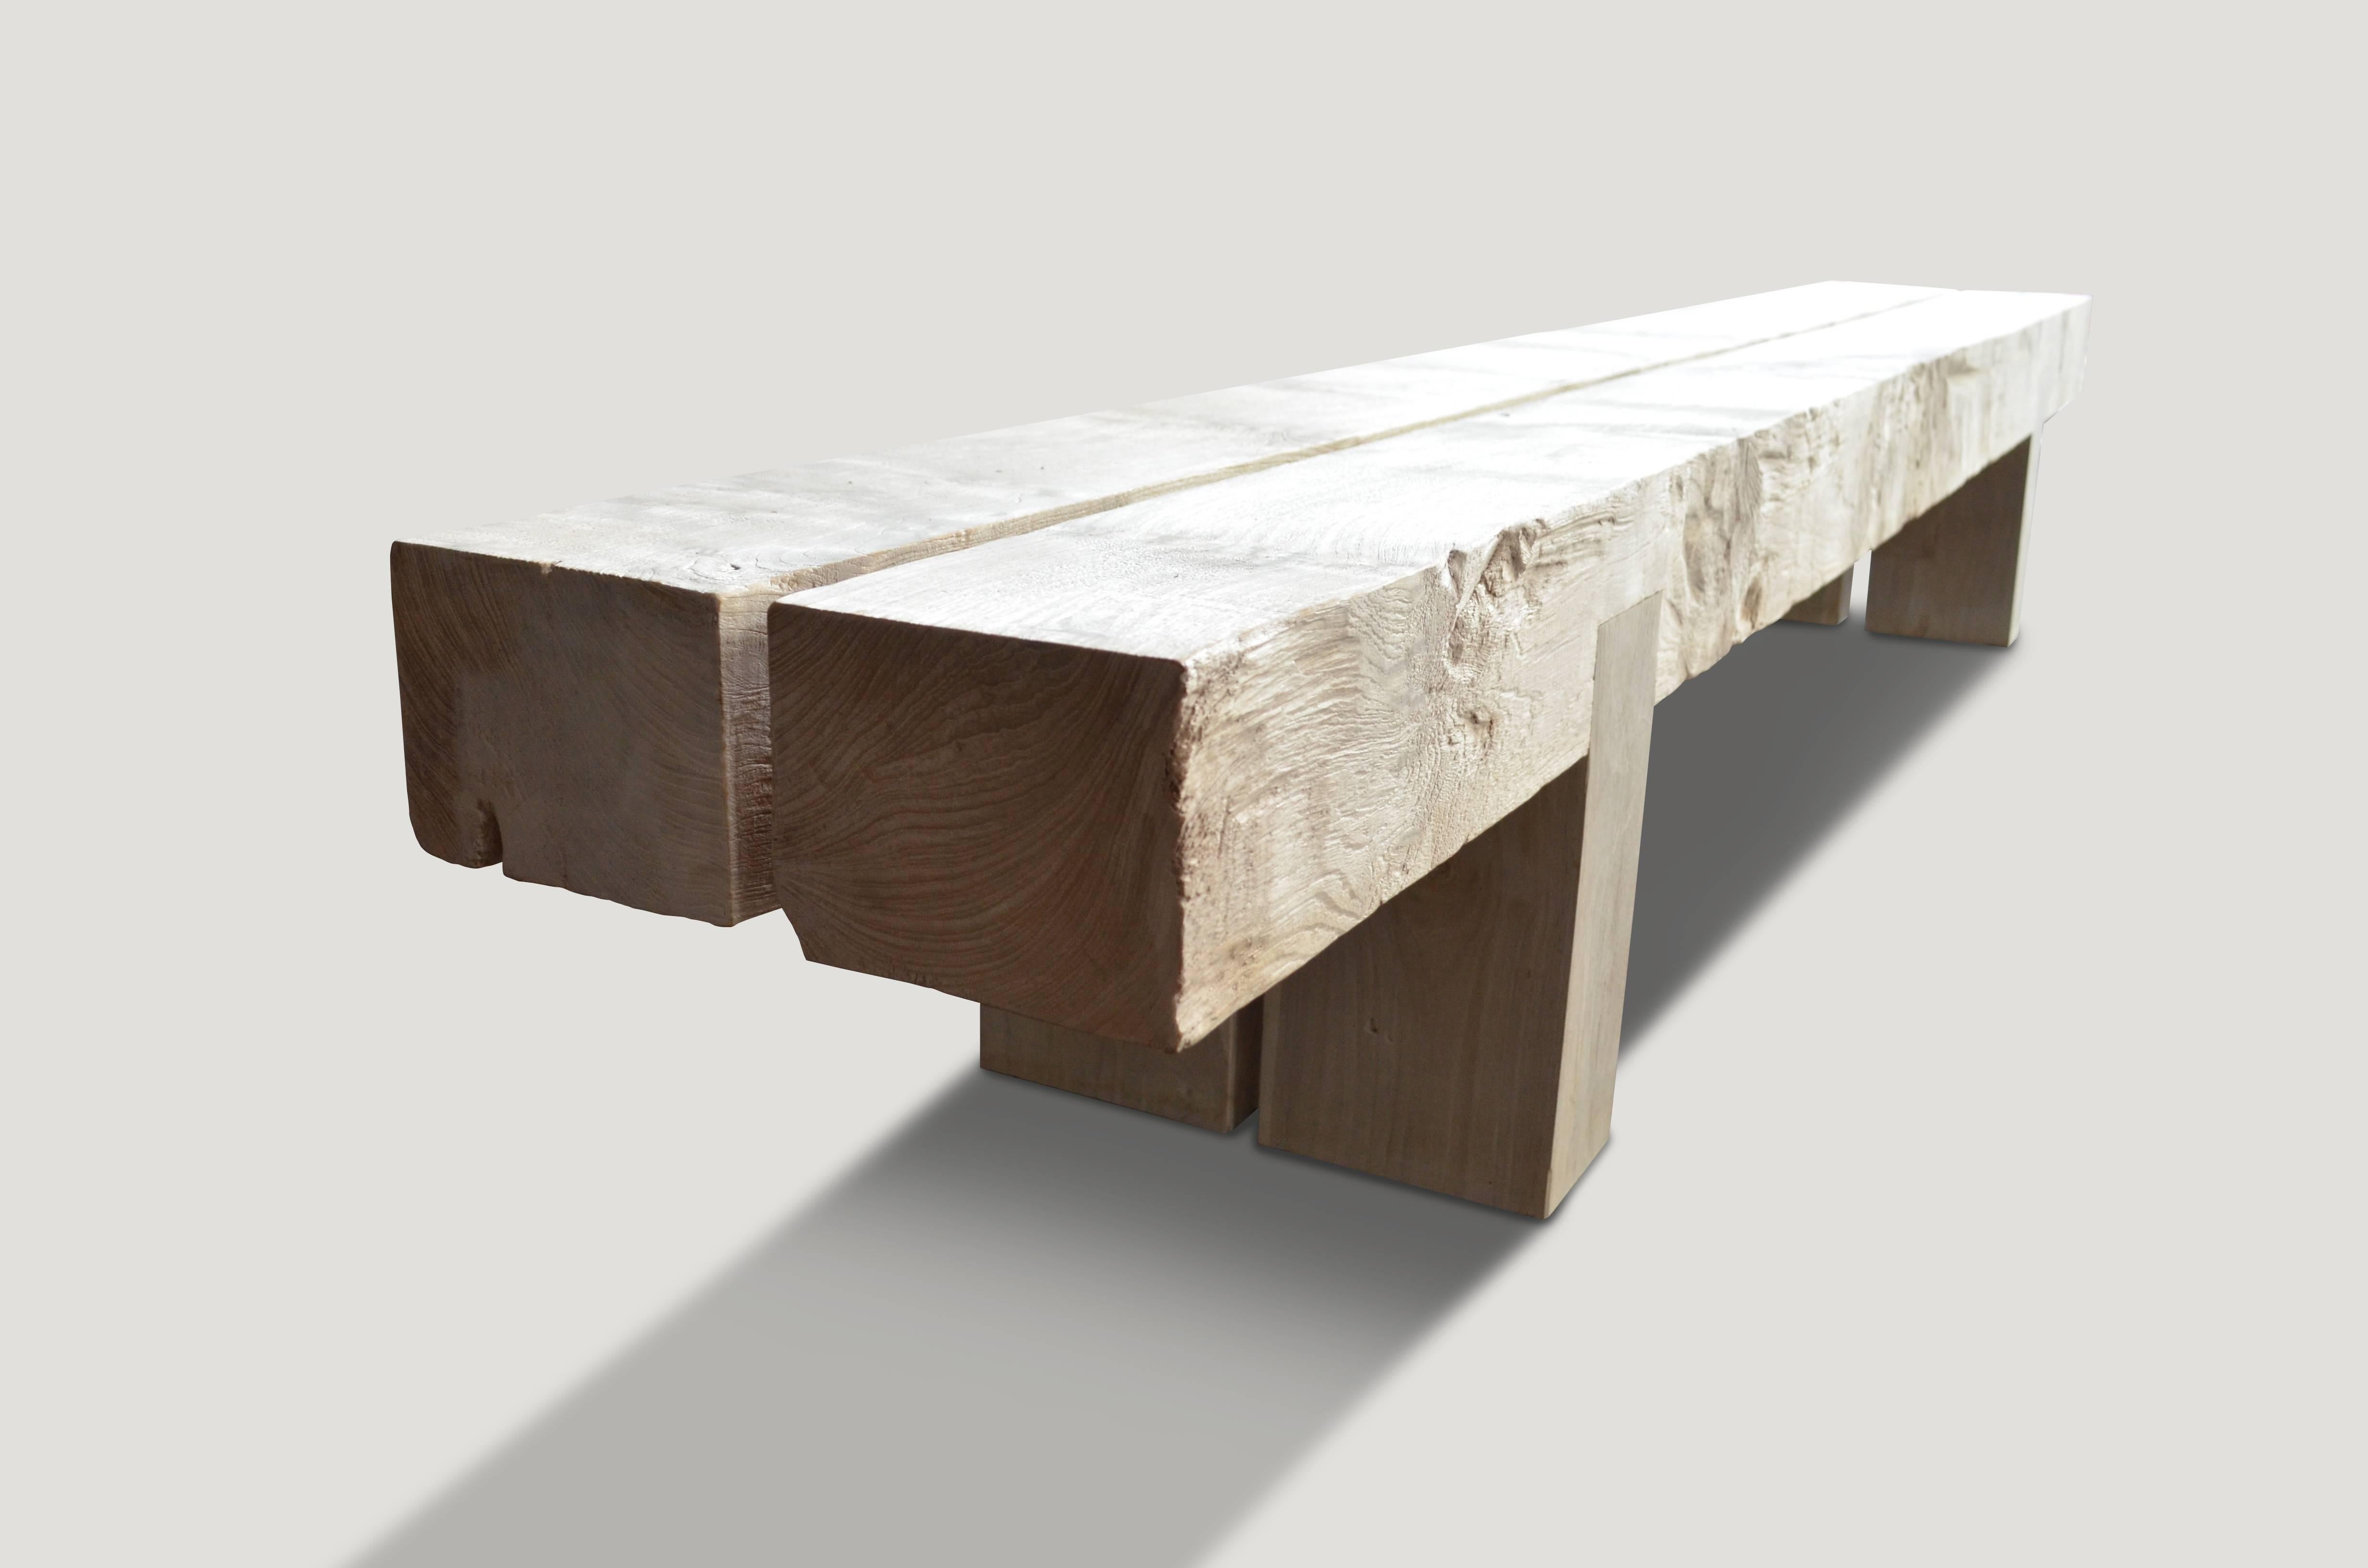 Andrianna Shamaris St. Barts Teak Wood Log Bench In Excellent Condition For Sale In New York, NY